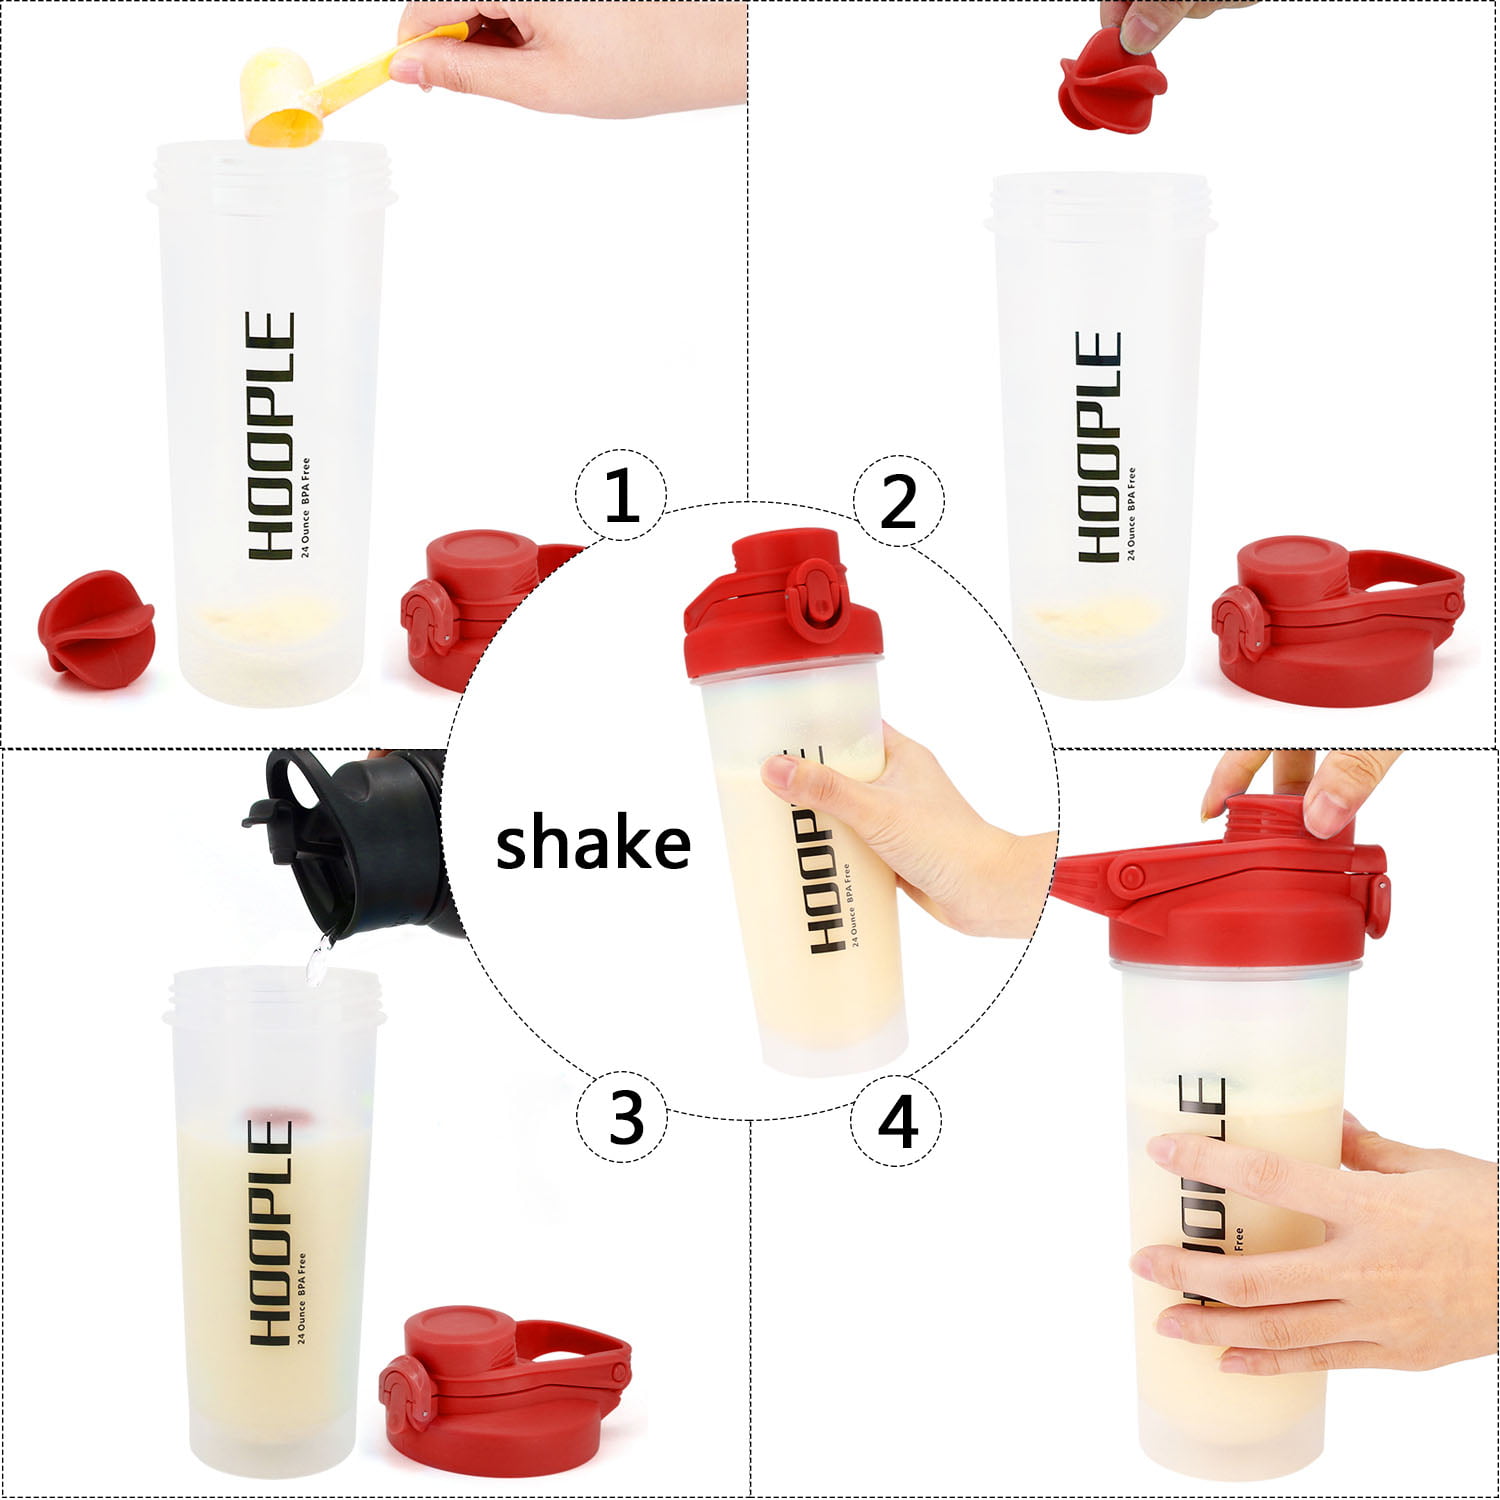 Auto-Flip Shaker Bottle 4 Pack for Protein Mixes Cups Powder Blender Smoothie Shakes BPA Free Small Shake with Powerful Mixing Ball - 24 Ounce (4